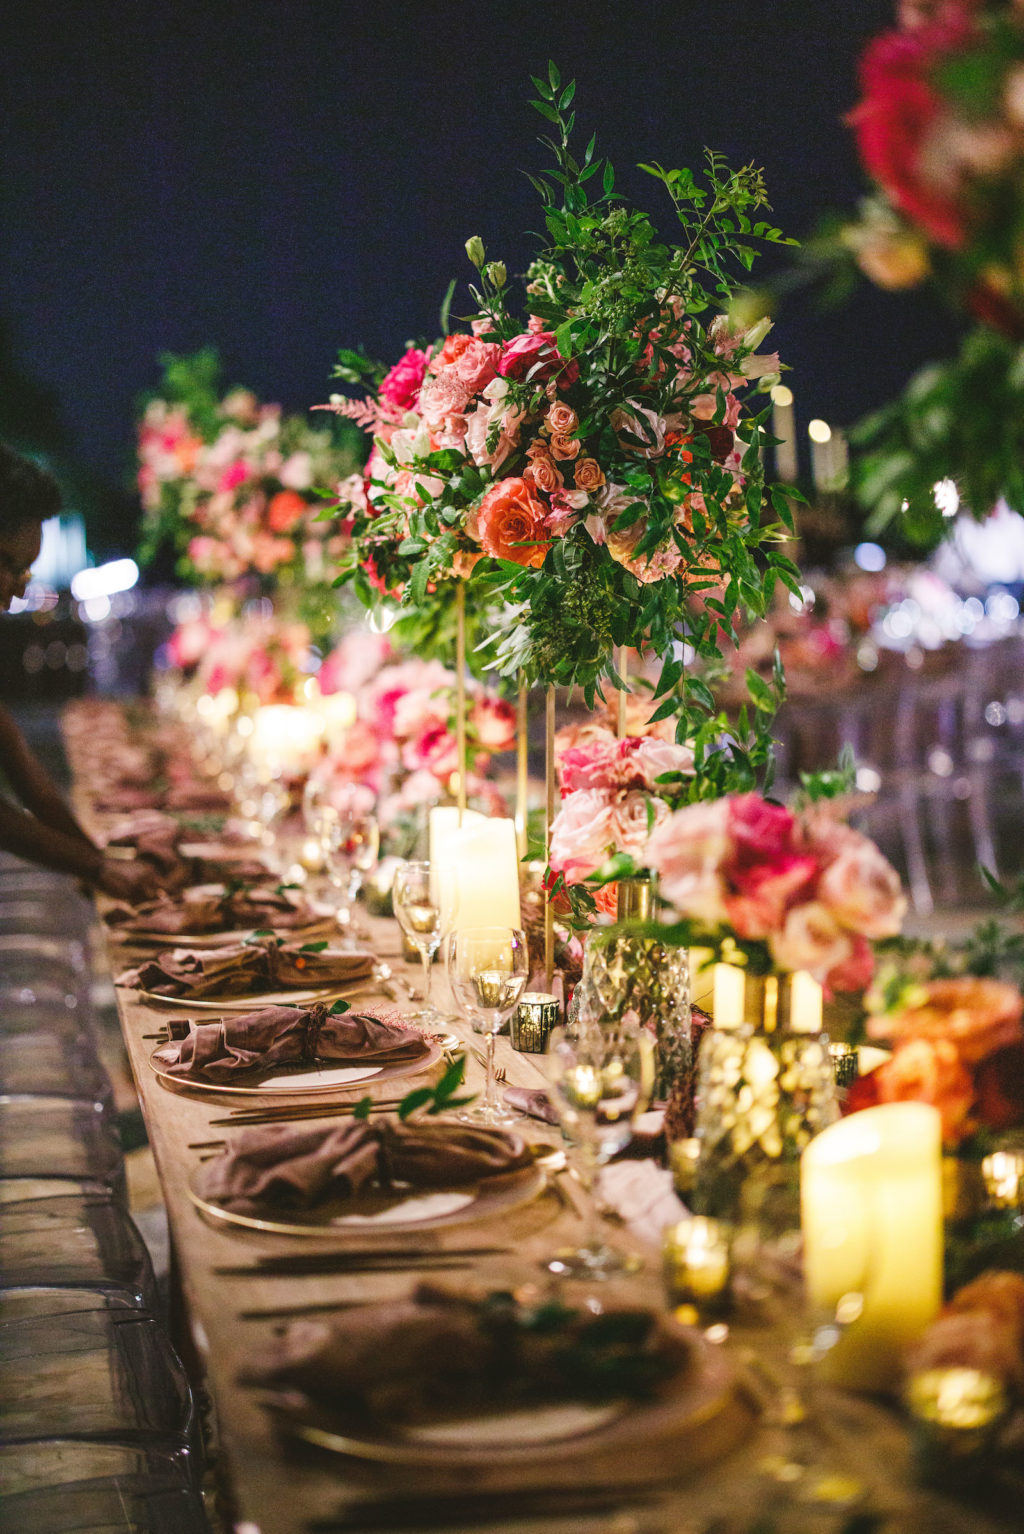 Luxury Elegant Tampa Wedding Reception with Long Feasting Tables featuring Colorful Blush Pink, Fuchsia and Orange Rose Centerpieces with Greenery and Candles